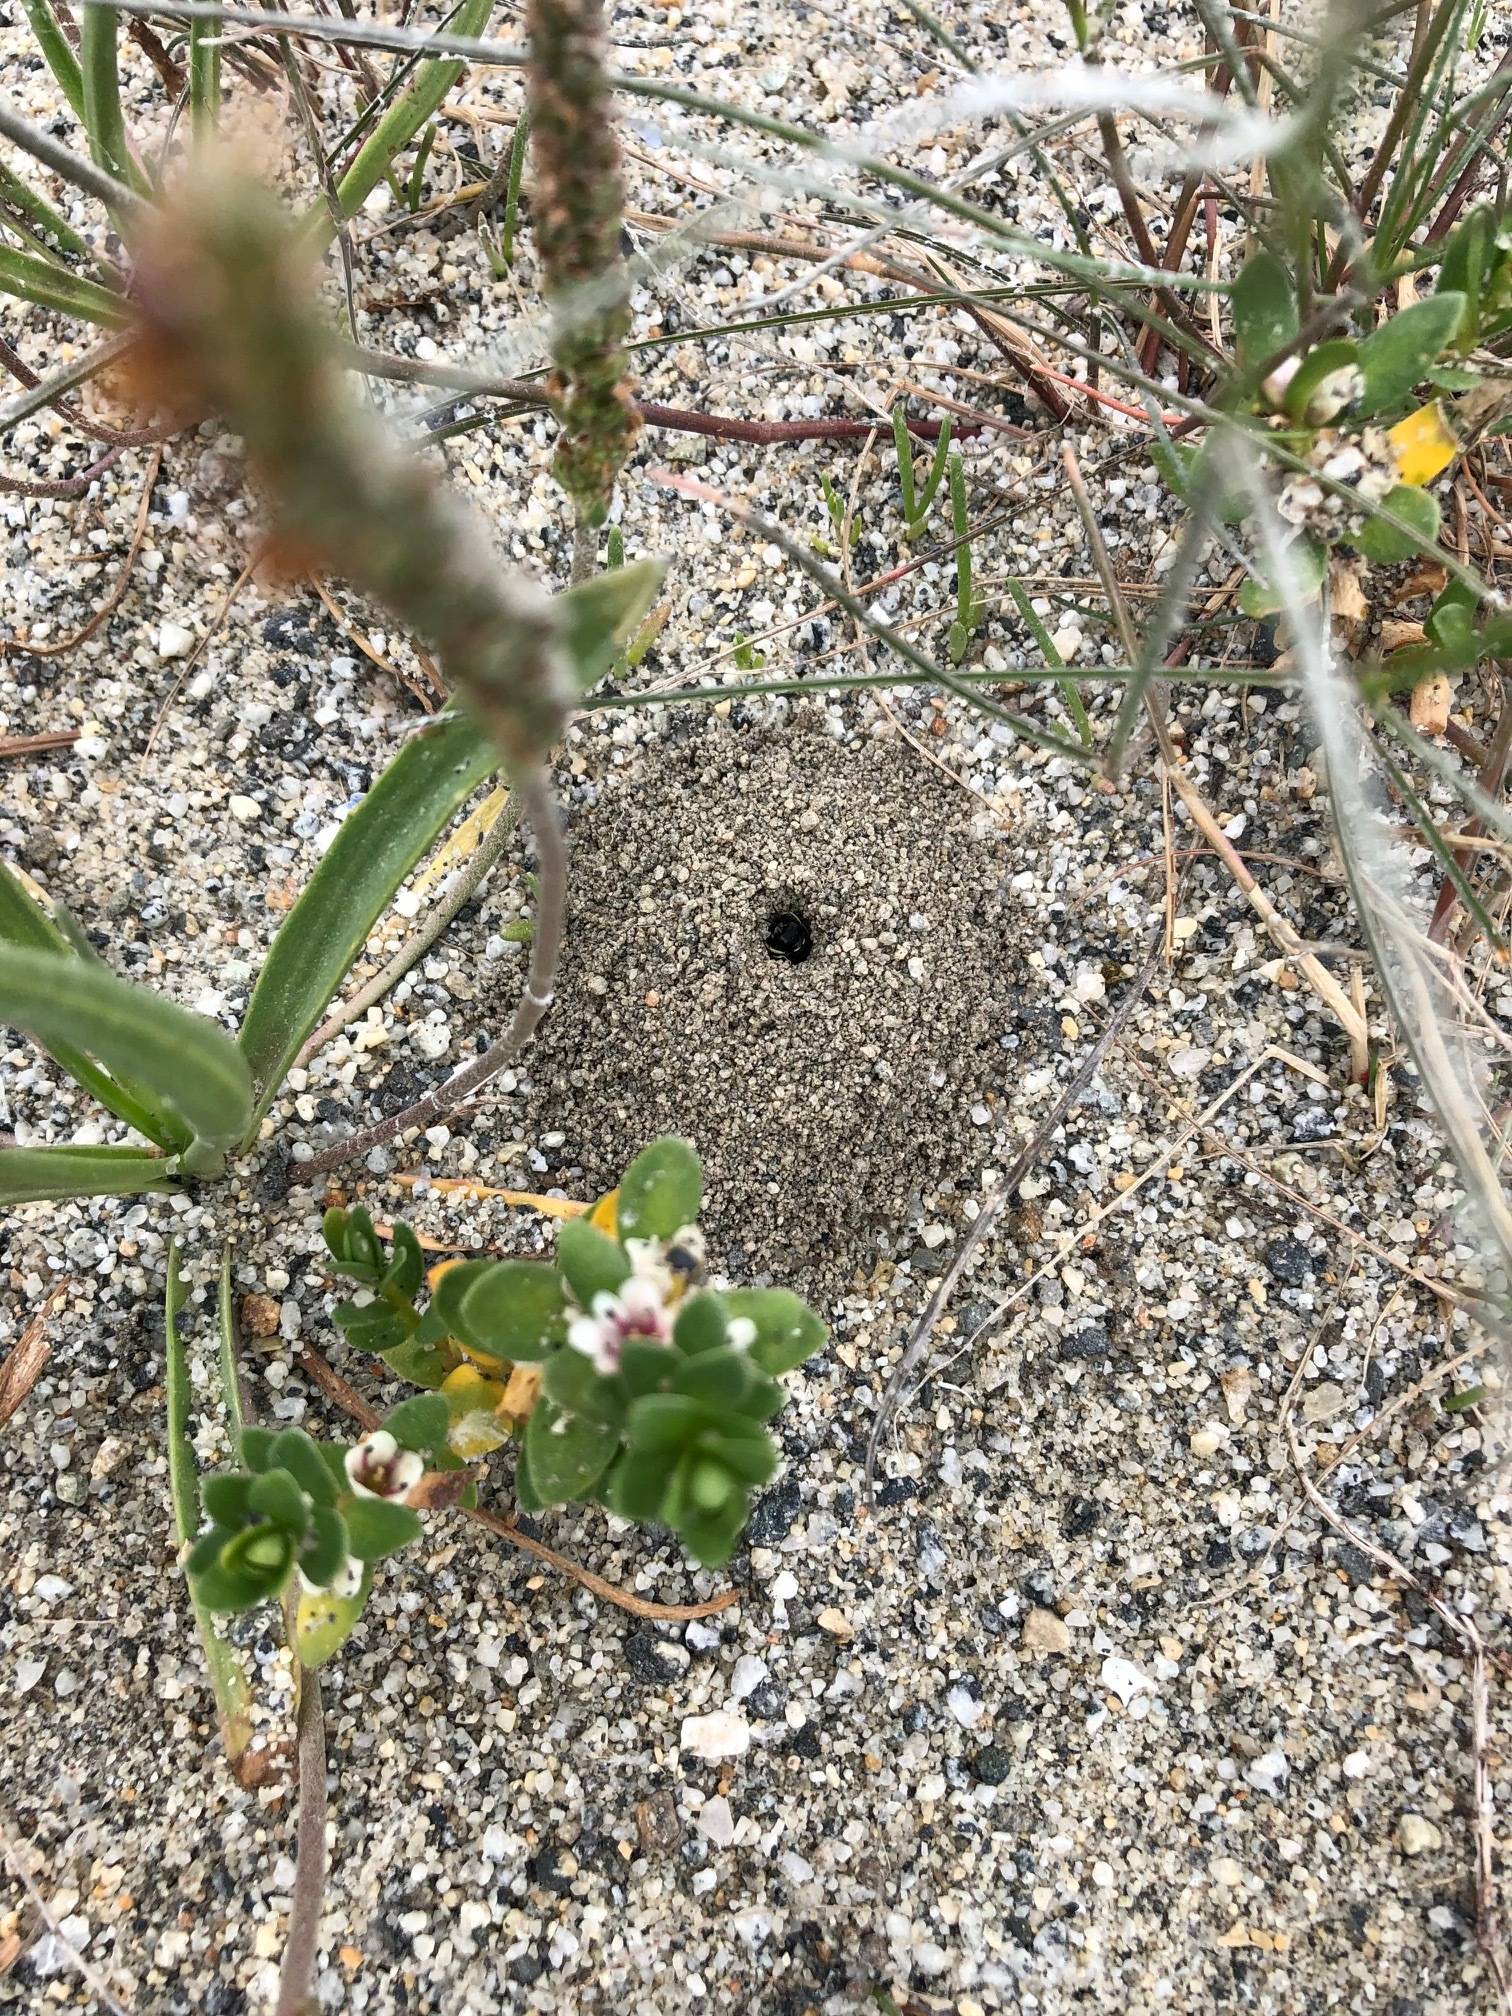 The burrow of a square-headed digger wasp, which has pulled down below the entrance. (Courtesy Photo / Kathy Hocker)